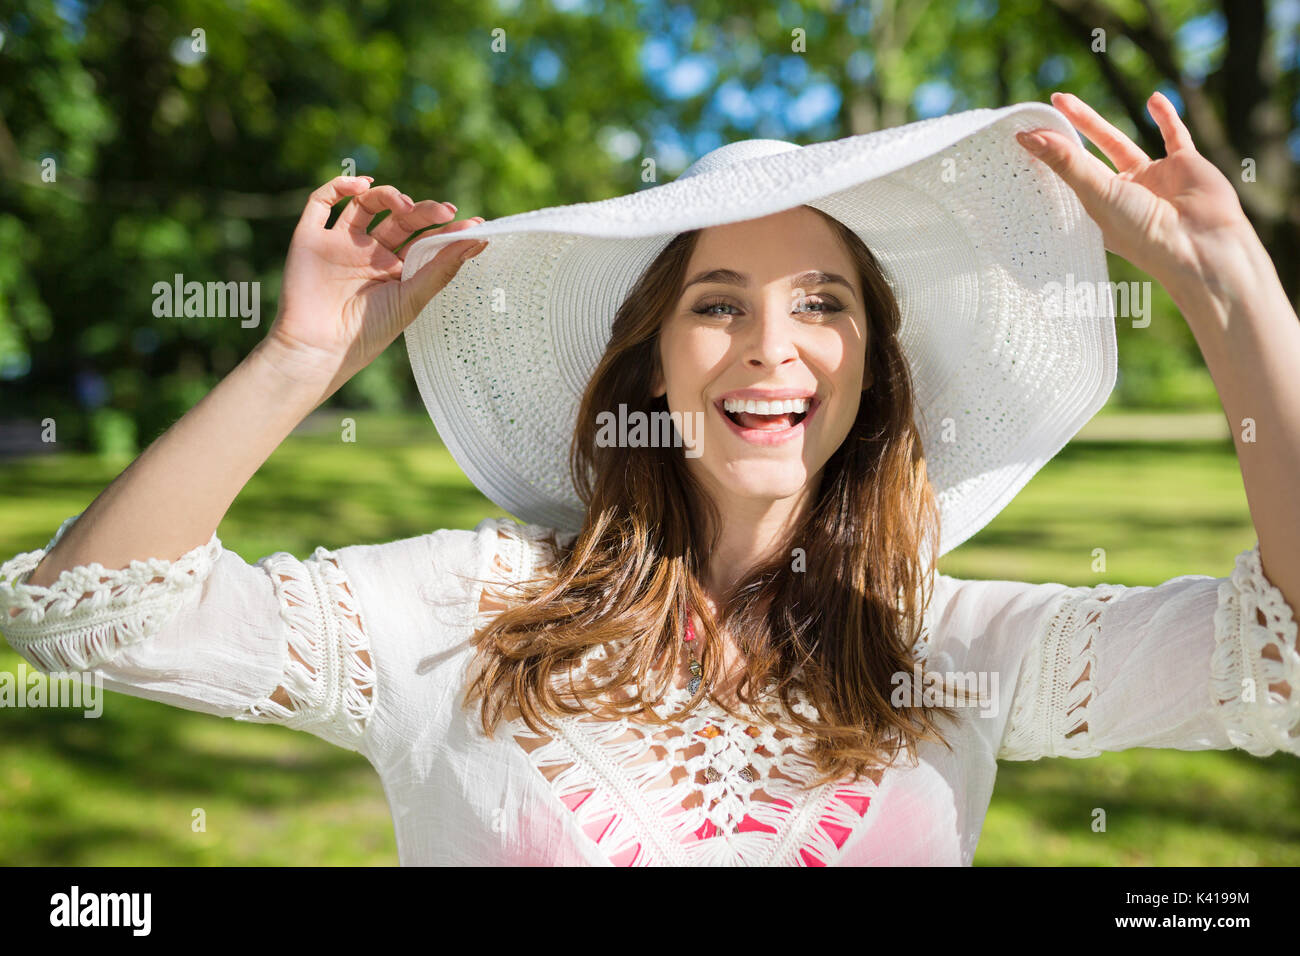 Front portrait of happy young woman standing in park holding hat Stock Photo